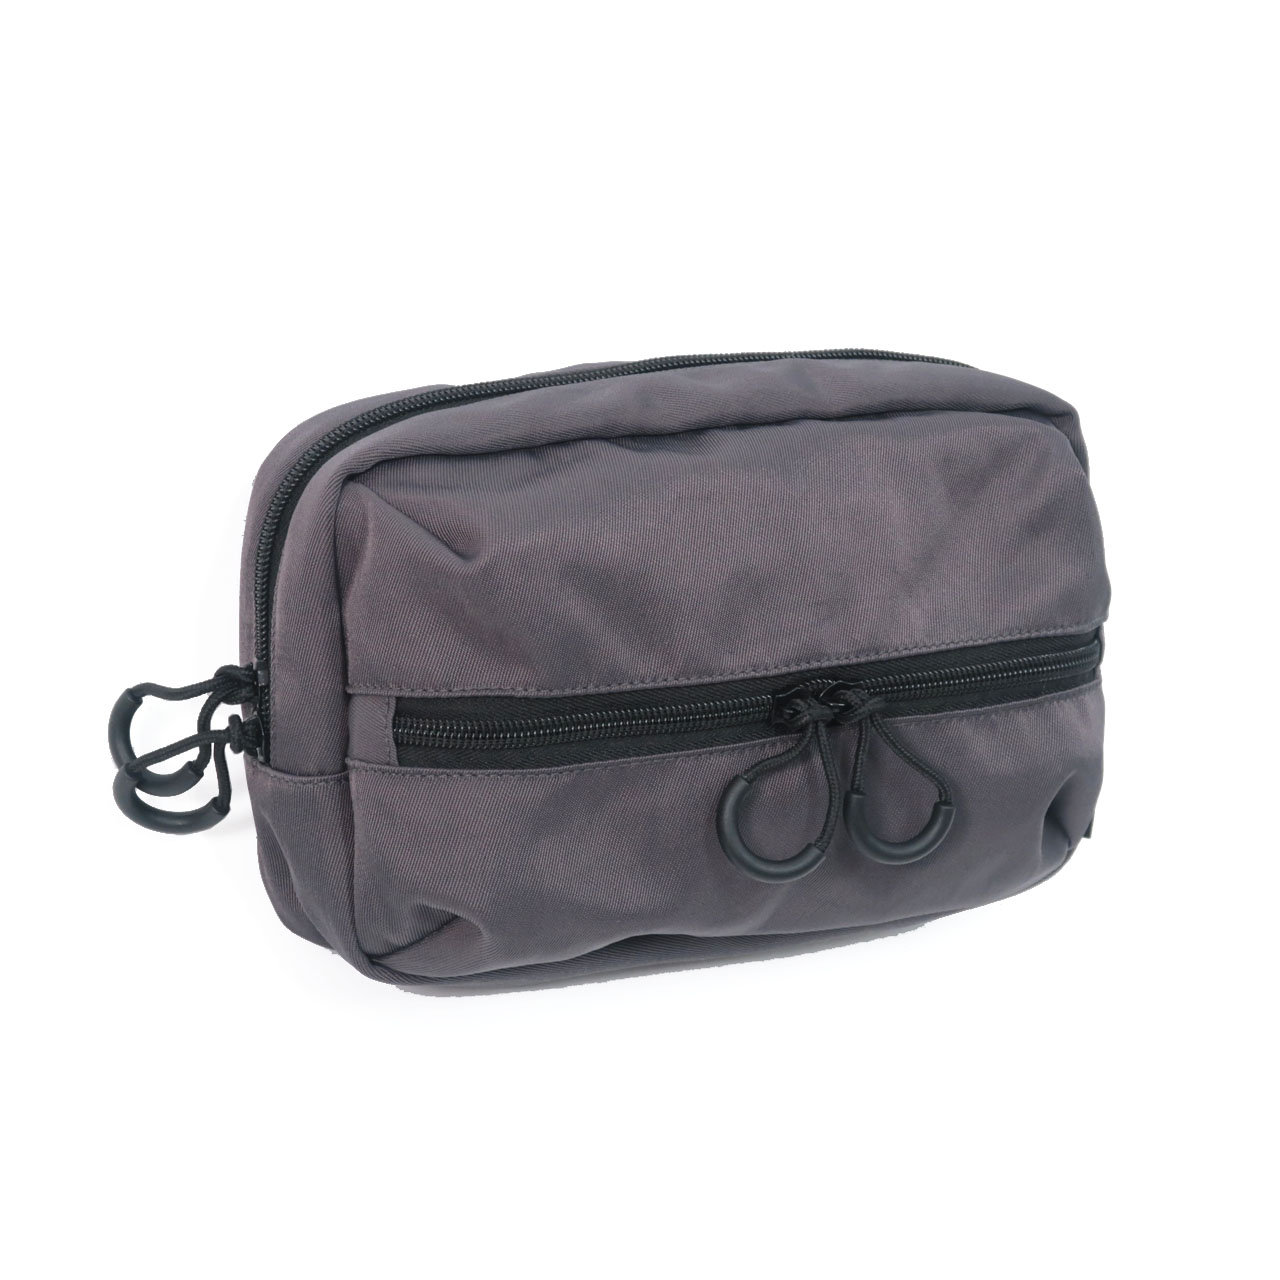 GOWITH MULTI POUCH / ゴーウィズ マルチポーチ - DARK GRAY 